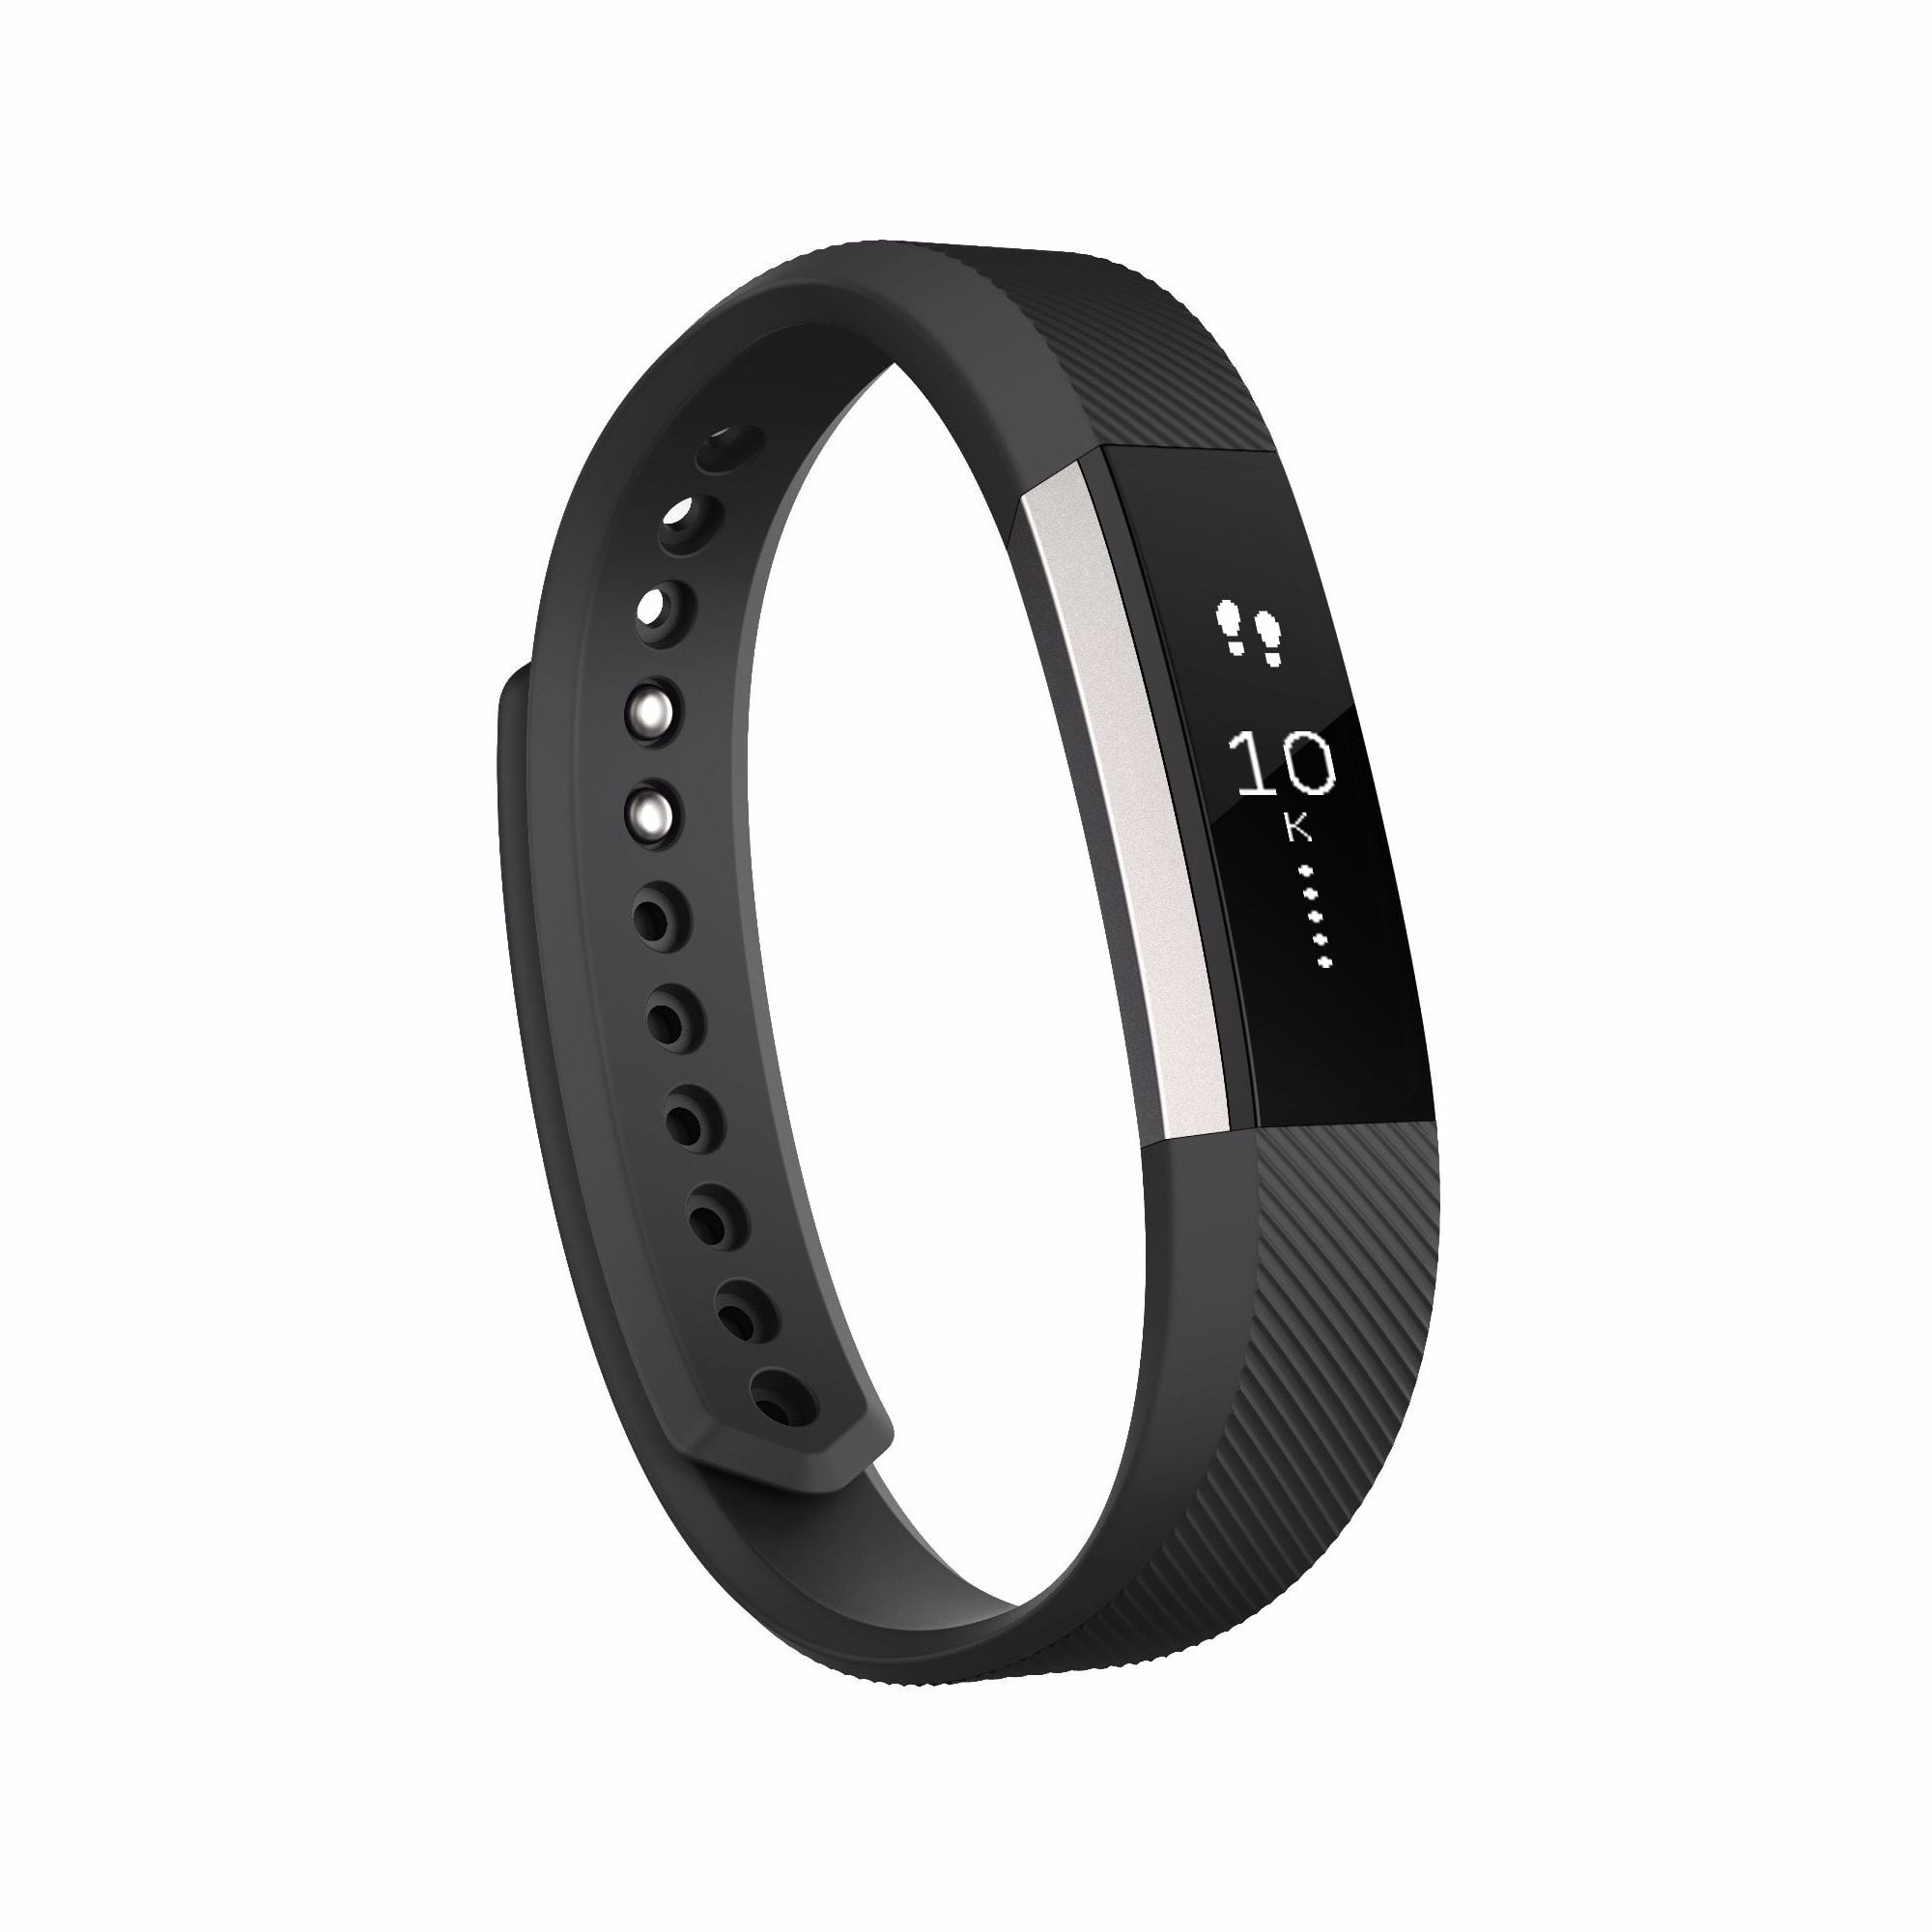 Fitbit Alta Fitness Wristband Activity Tracker Black Large NON-WORKING FOR PARTS 